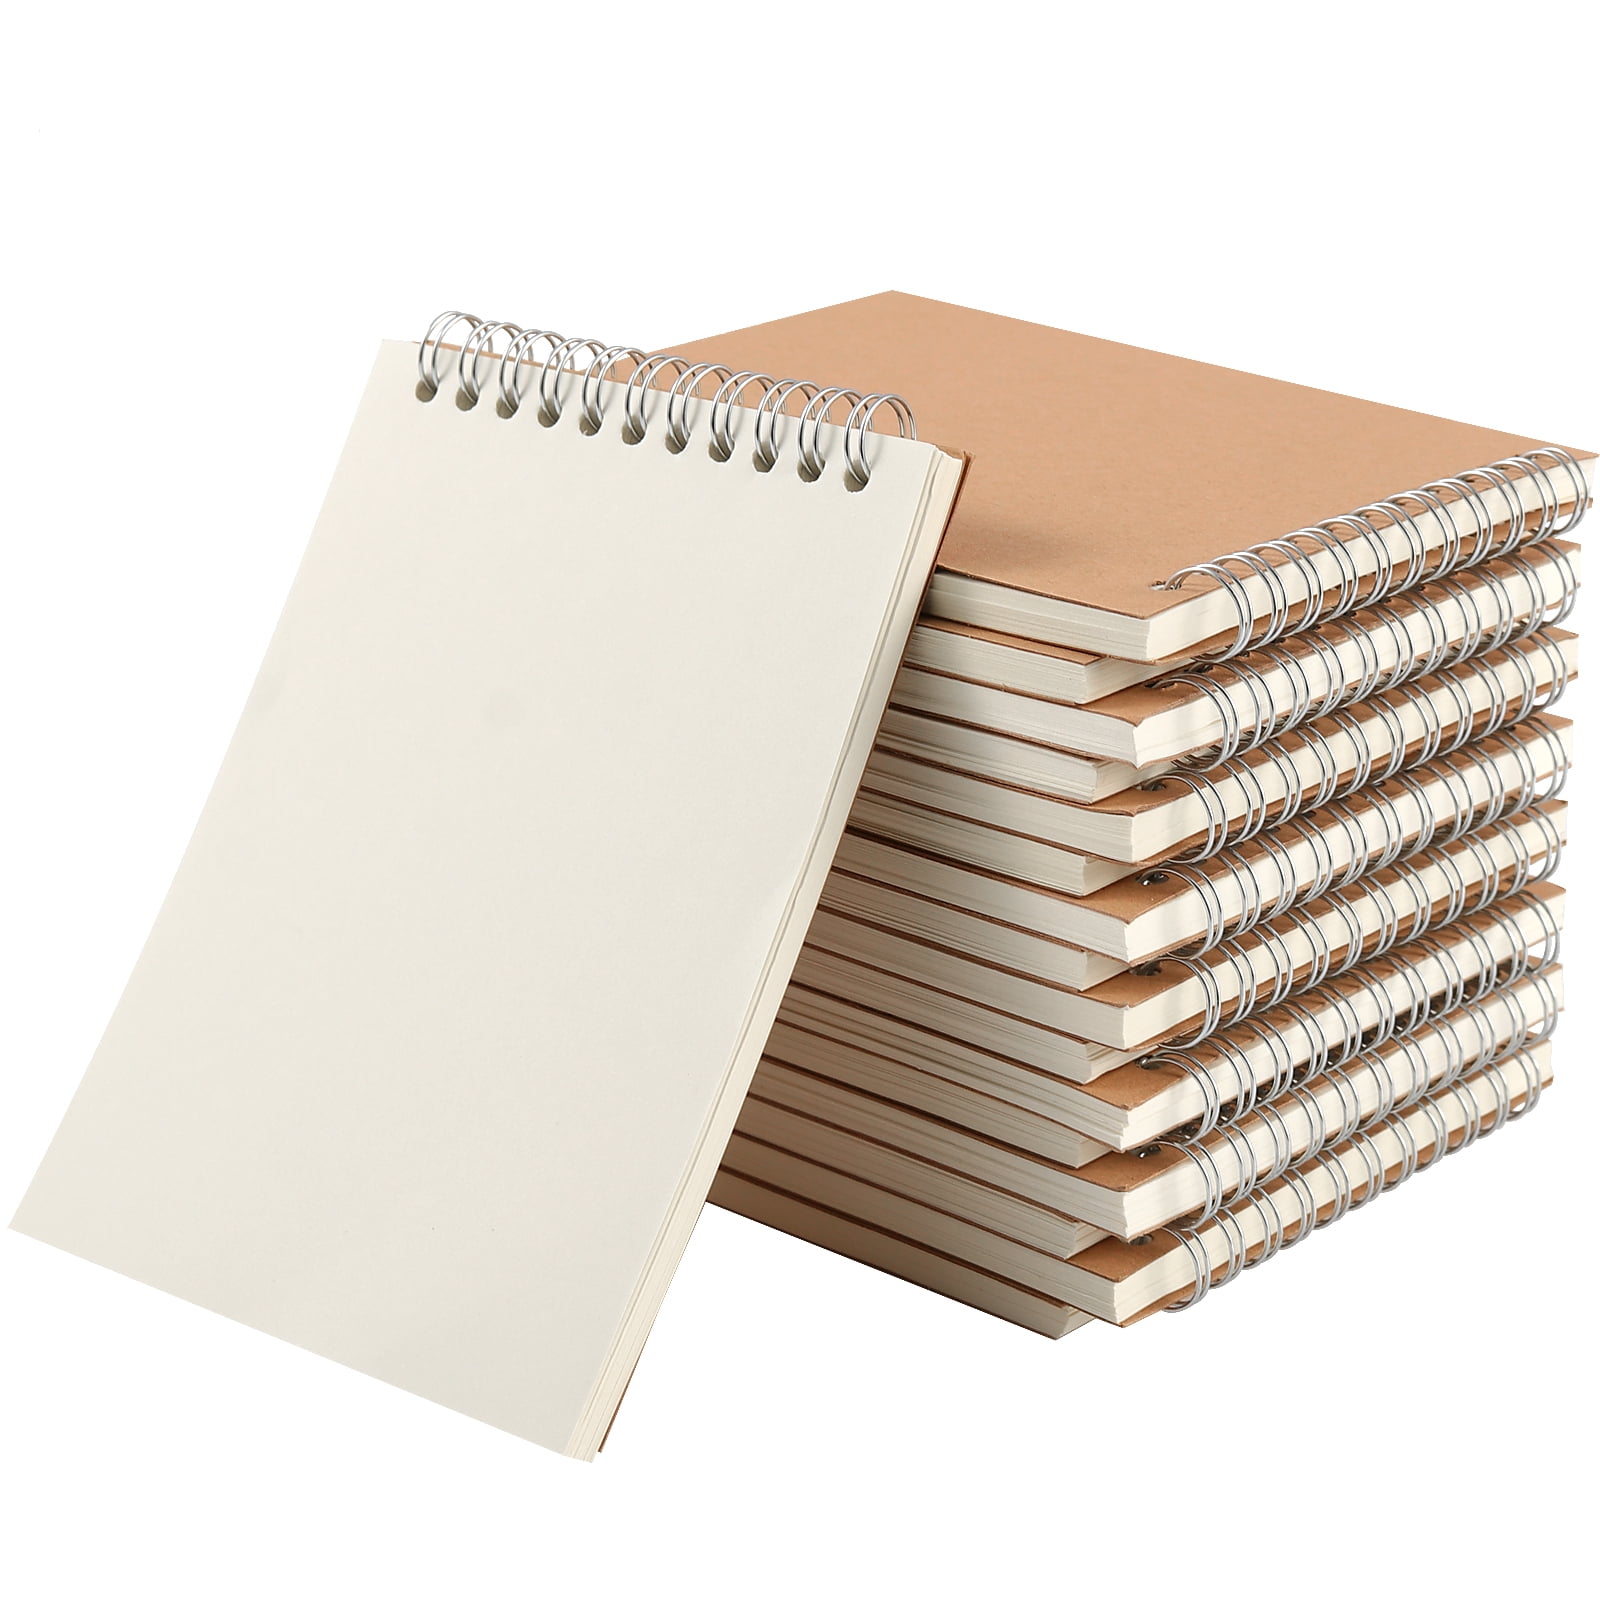 GIFTEXPRESS Bound Spiral Premium Sketch Book Sketch Pads Set, 4 Pads  x30-Sheets, 8.5 X 11 Side Wire Bound, White 120 Paper Sheets for Pencil  Ink